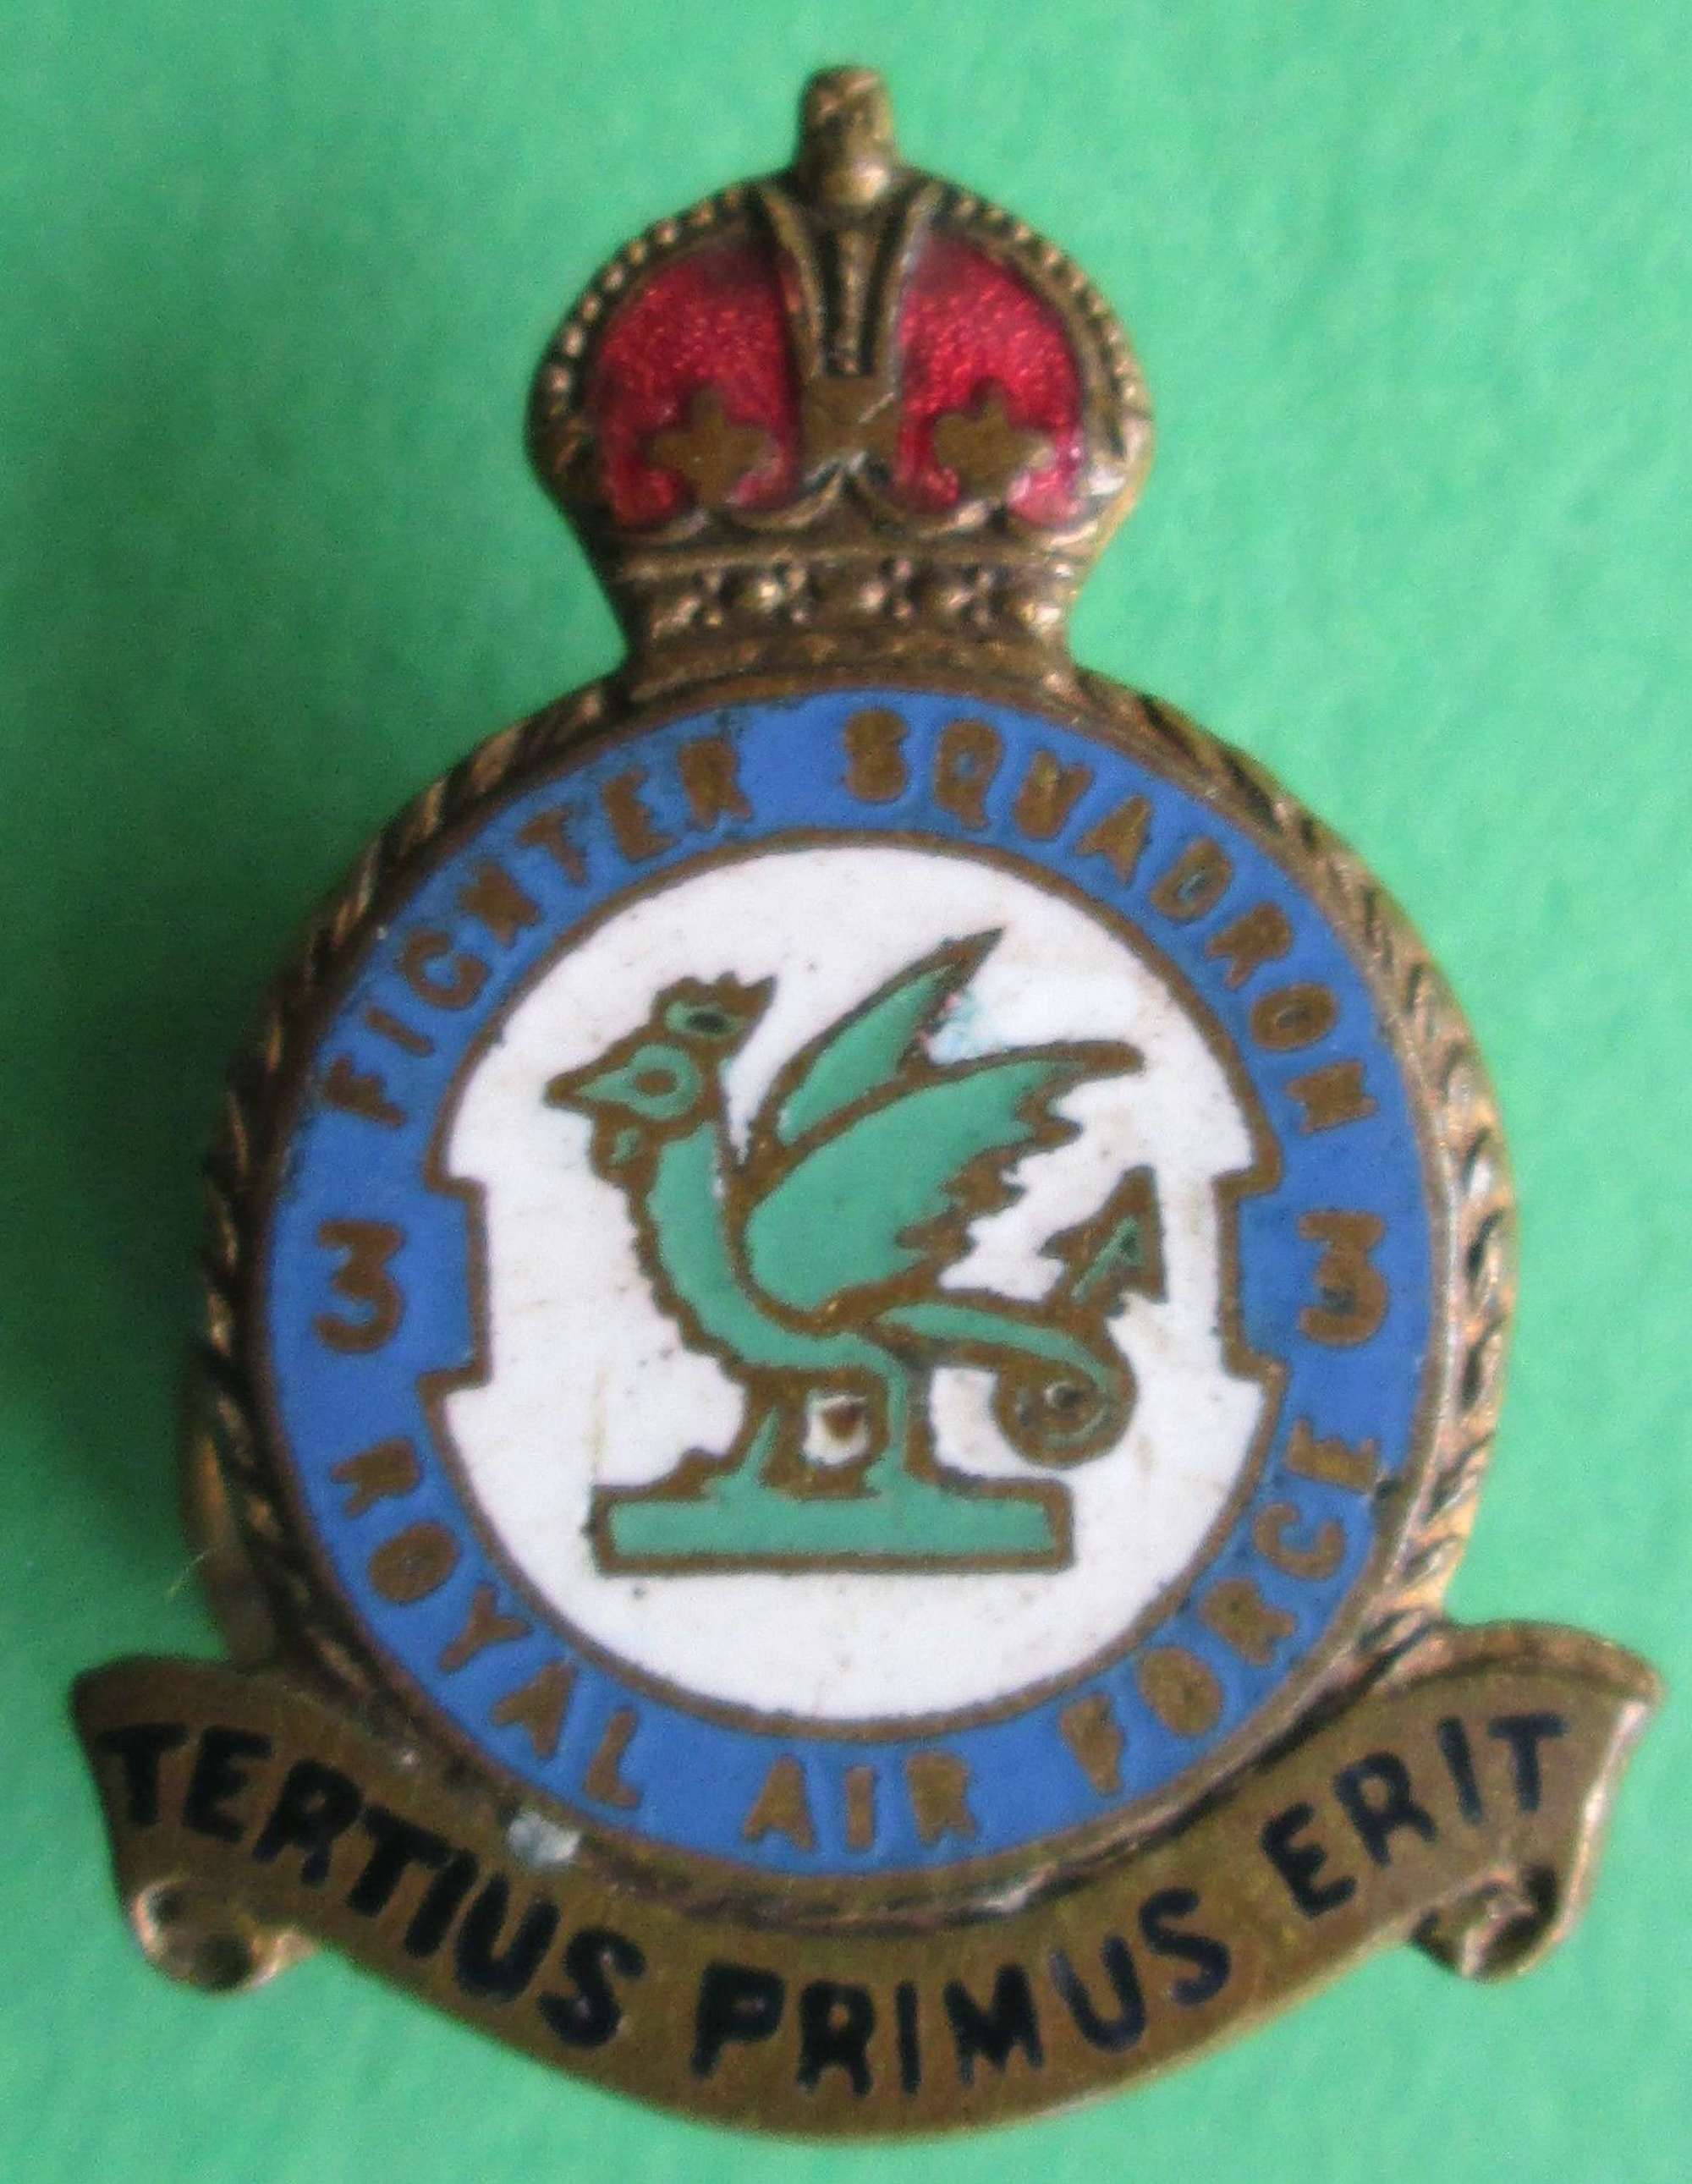 WWII PERIOD 3rd ROYAL AIR FORCE SQUADRON BADGE